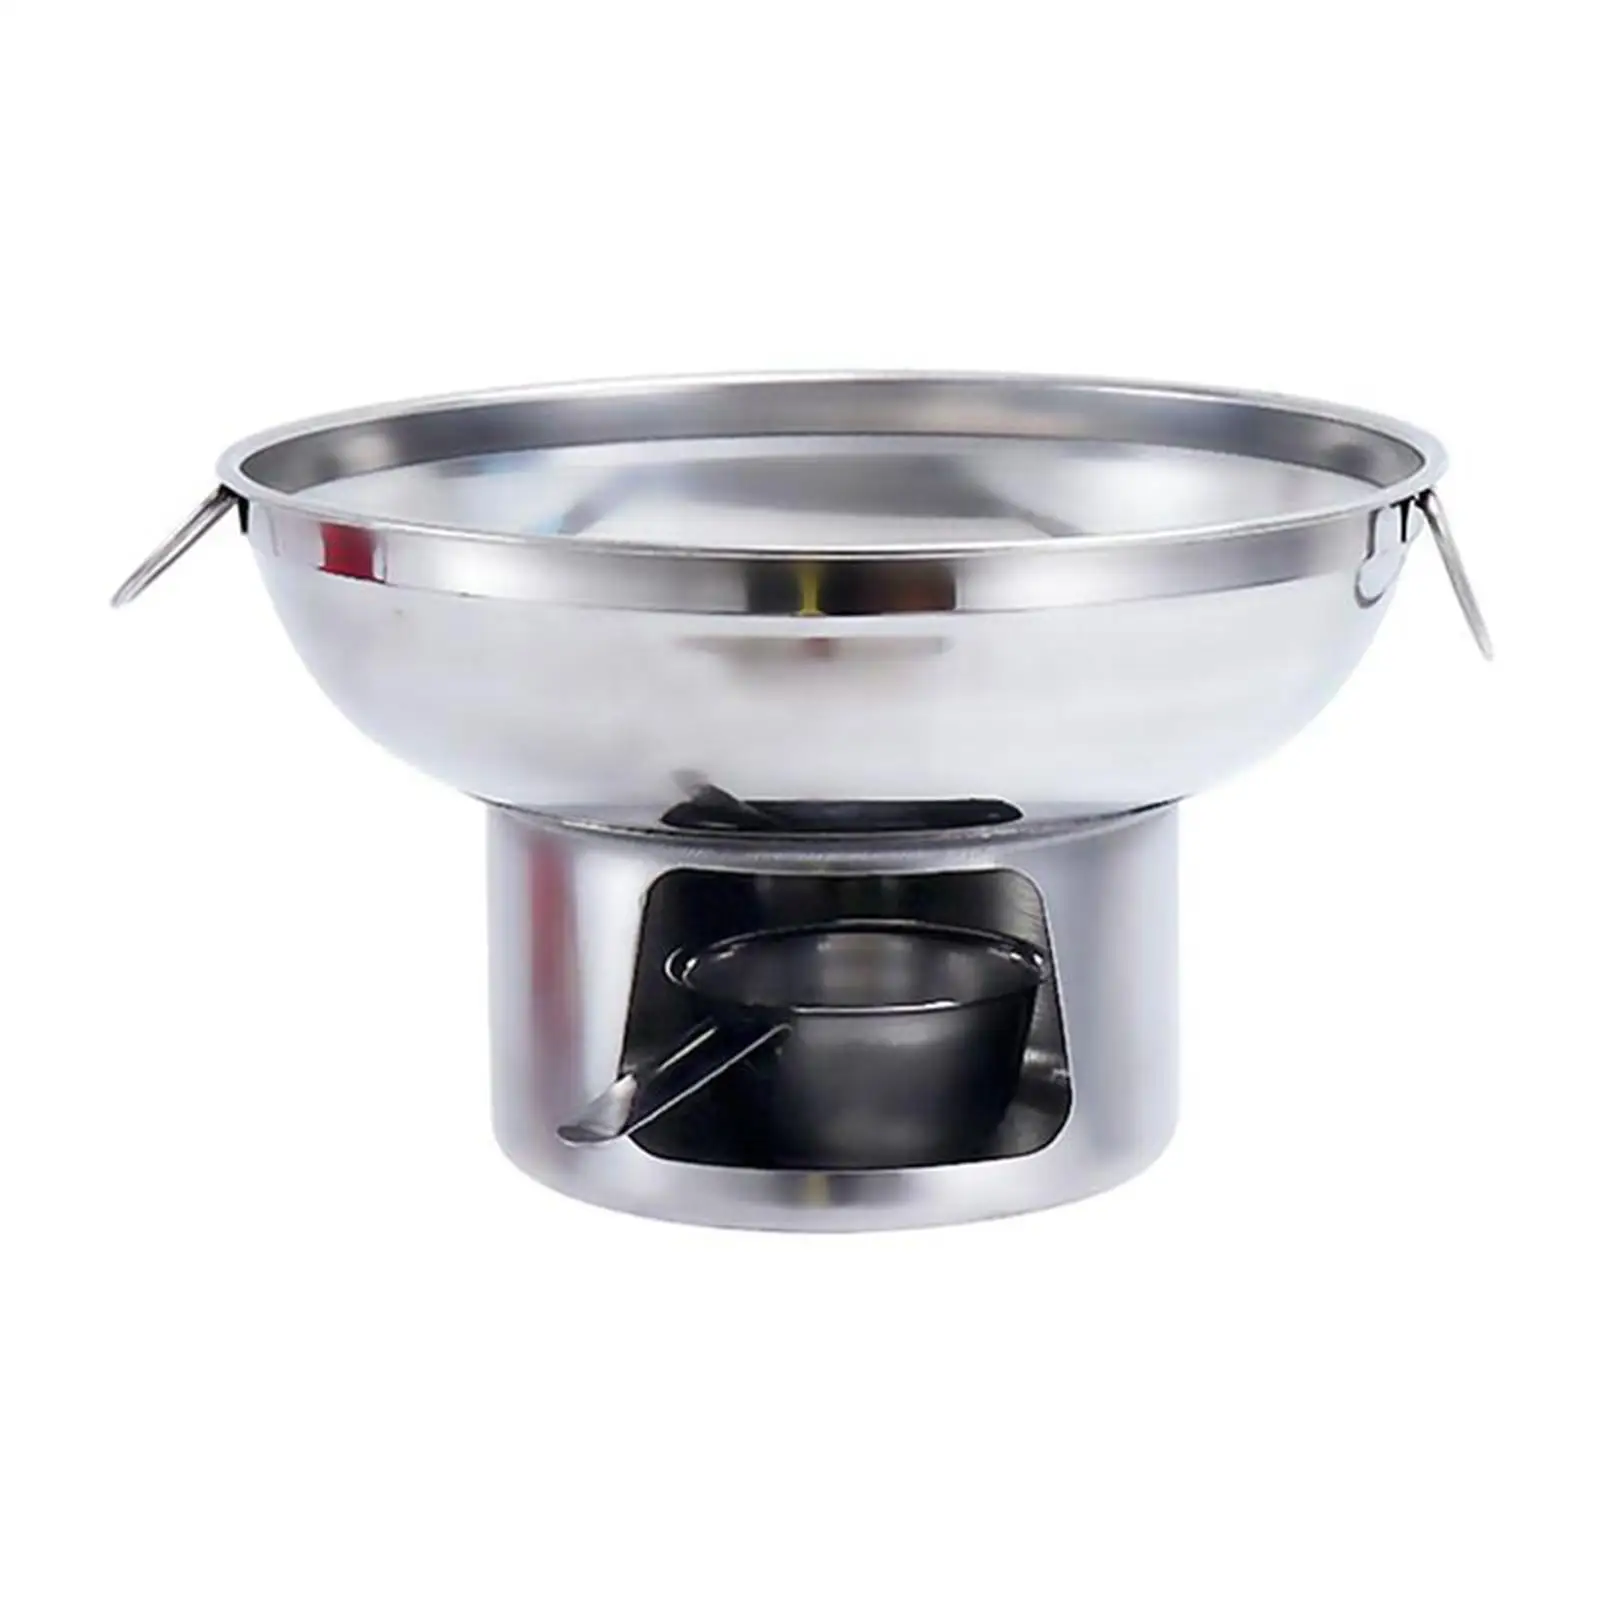 Small Hot Pot Cookware Outdoor Cooker Milk Tea Hot Traditional Chinese Hot Pot for Camping Home Restaurant Kitchen Countertop